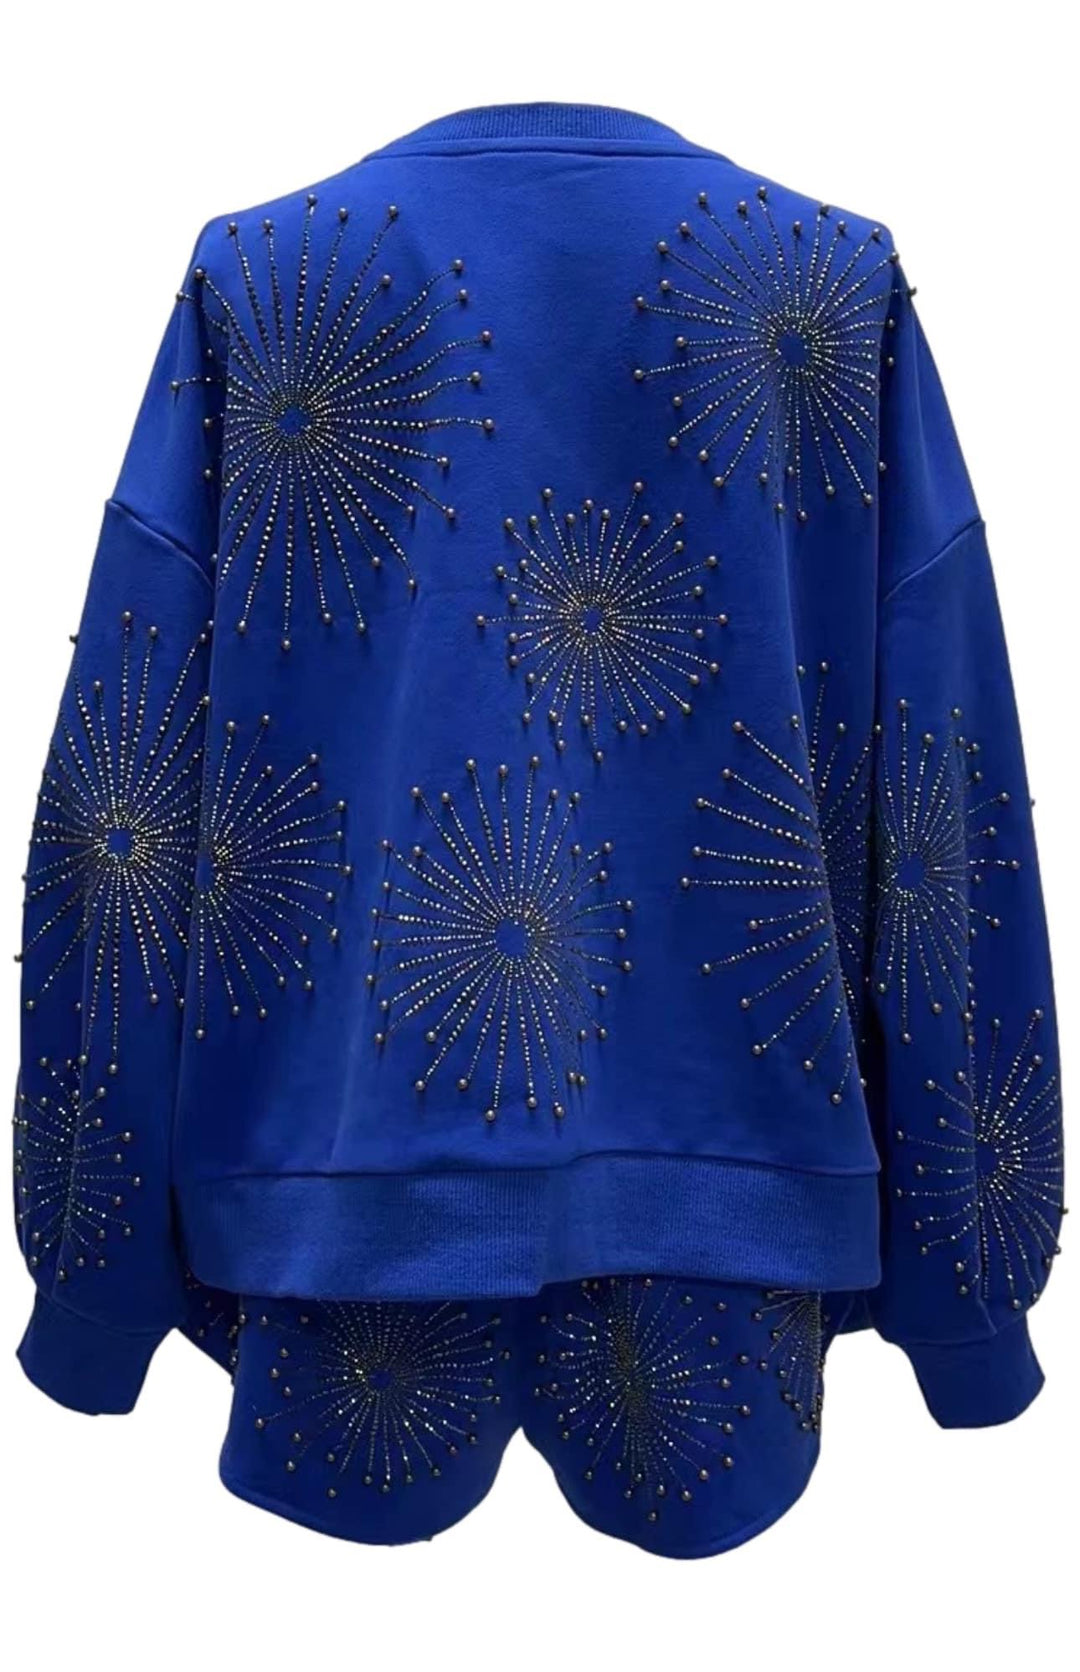 Royal Blue Queen Of Sparkles Firework Sweatshirt-Sweaters-Queen Of Sparkles-Shop with Bloom West Boutique, Women's Fashion Boutique, Located in Houma, Louisiana